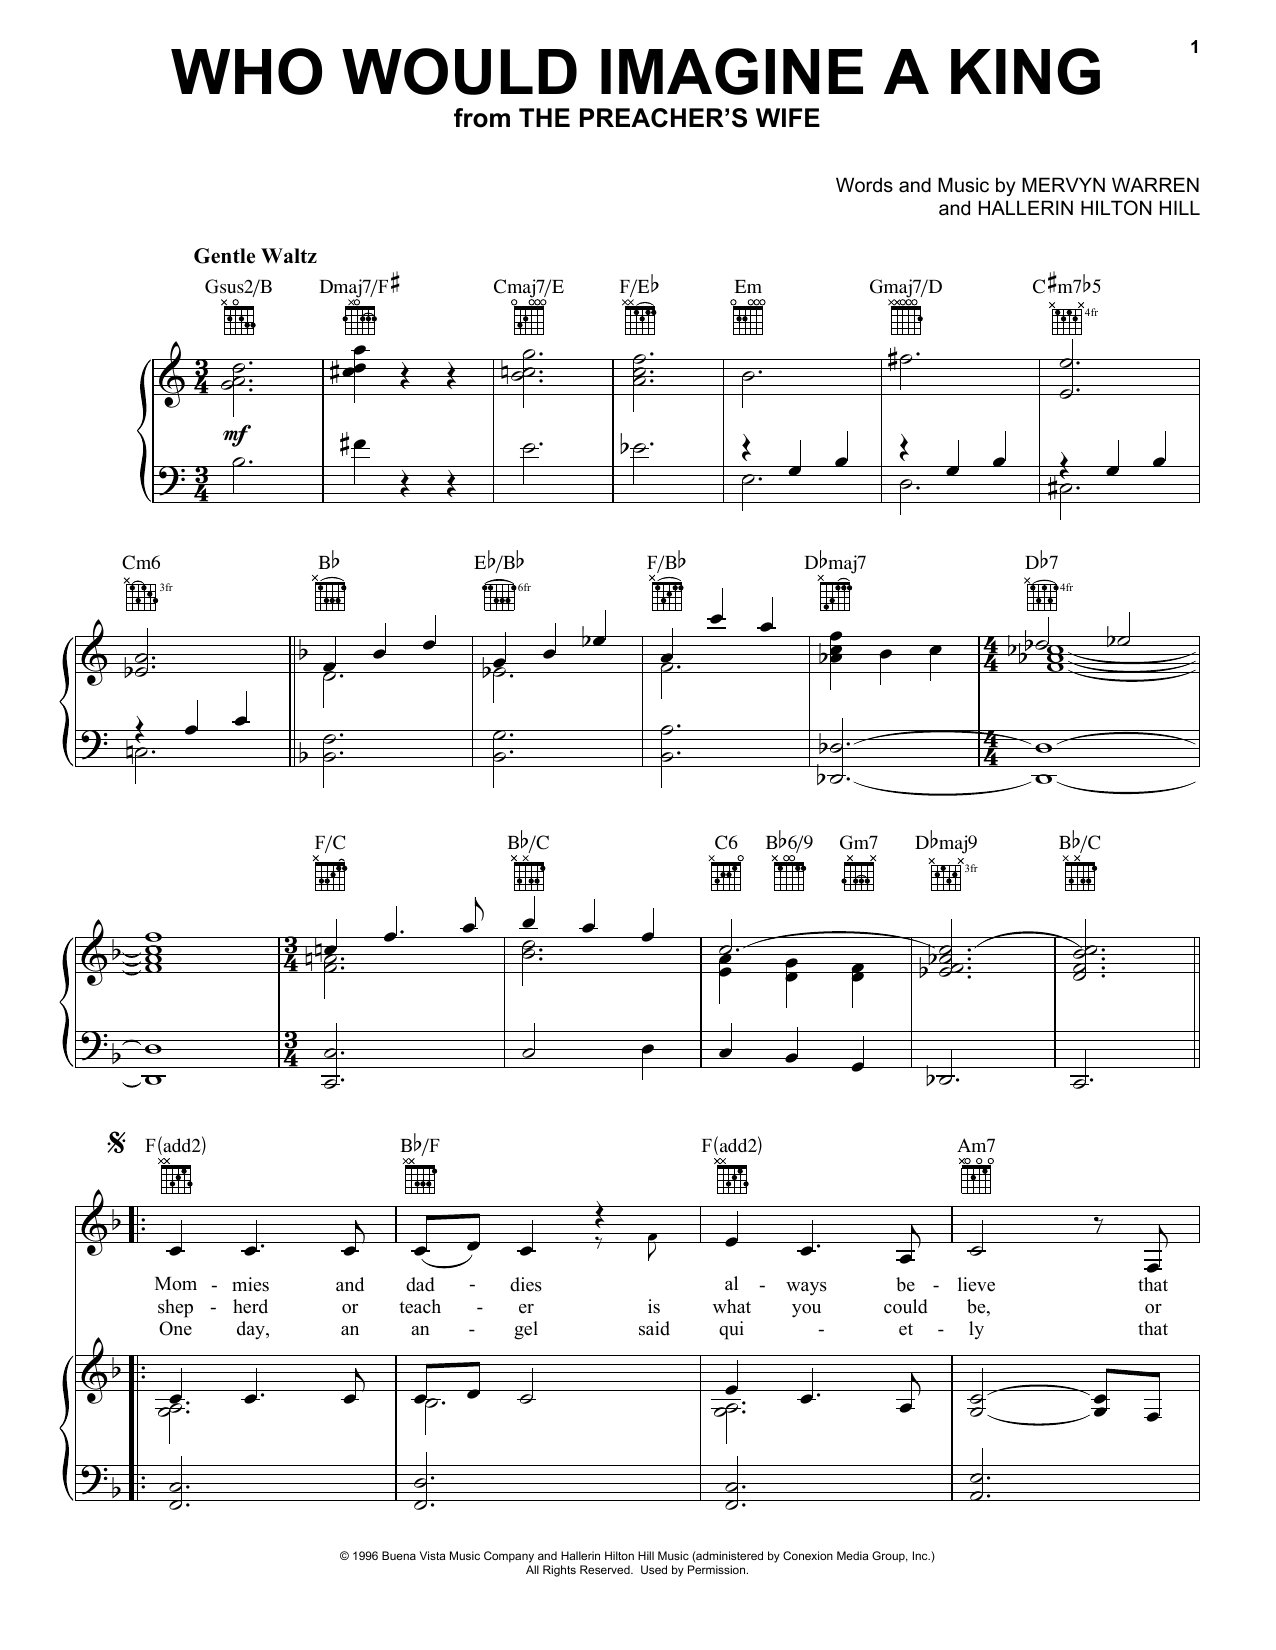 Download Hallerin Hilton Hill Who Would Imagine A King Sheet Music